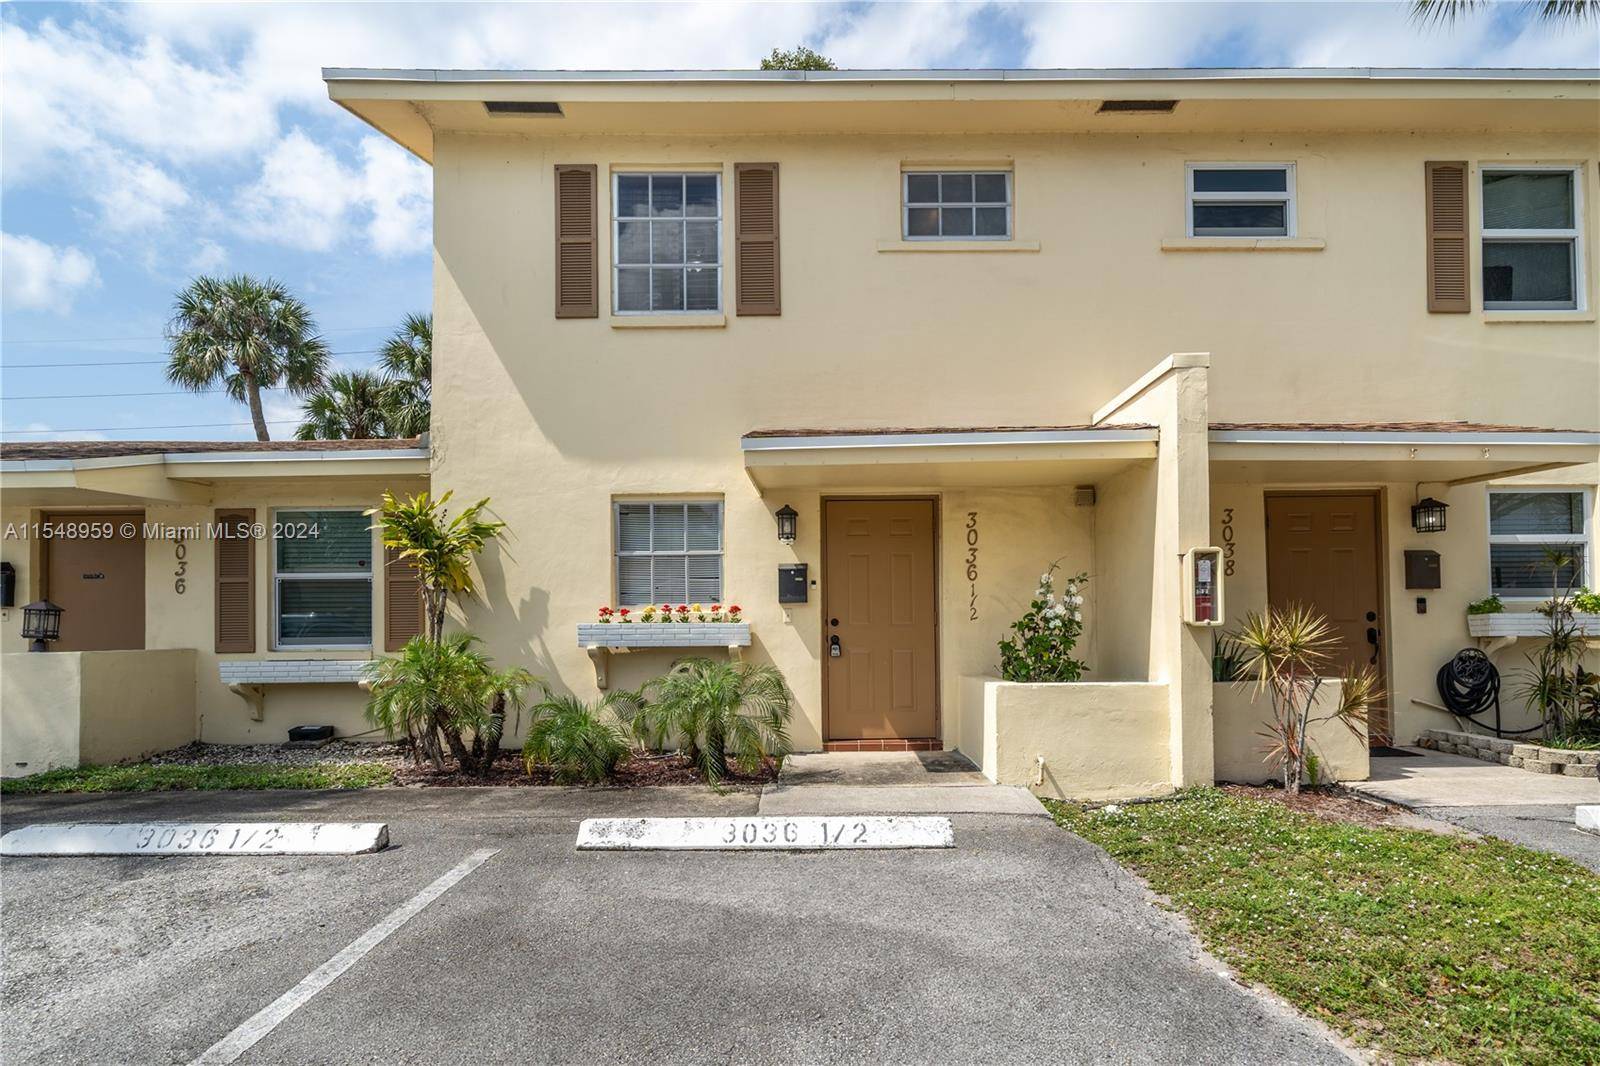 BEAUTIFUL 3 BEDROOMS AND 1 AND HALF BATHROOMS, TOWNHOUSE IN PALM AIRE.